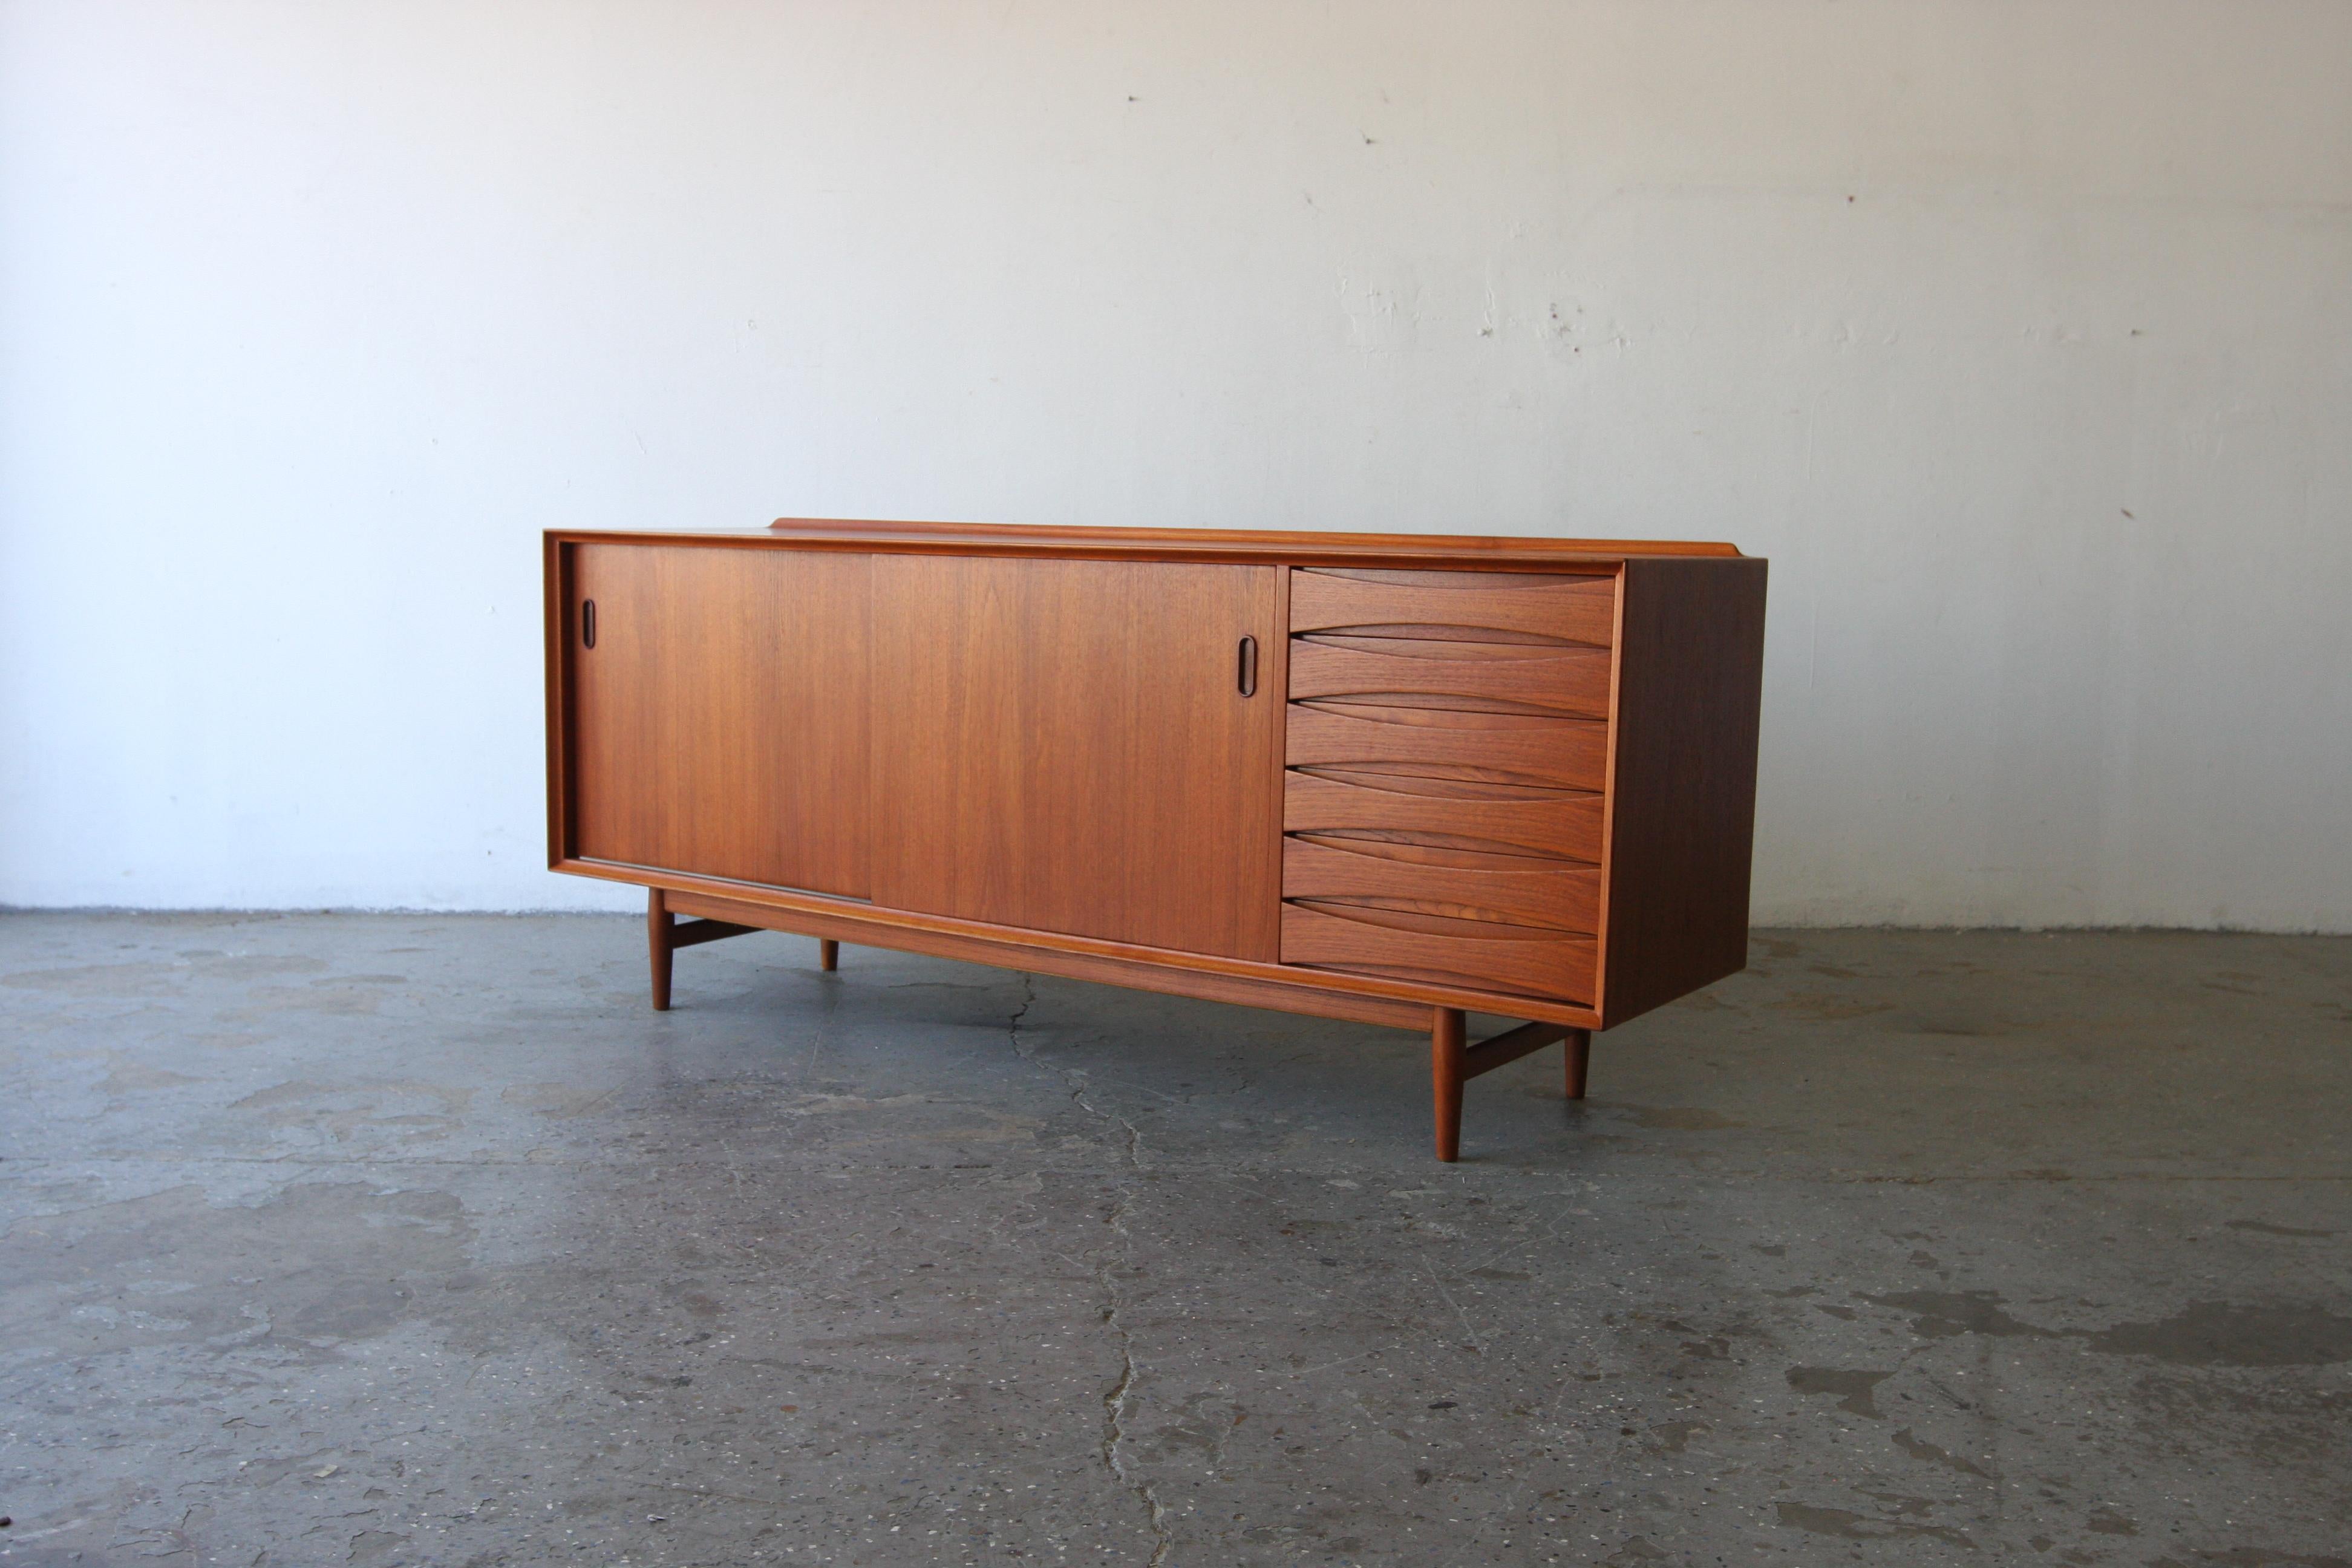 Danish teak credenza designed by Arne Vodder for Sibast. Timeless and functional design has 6 drawers and two sliding doors. Fully refinished teak on all sides, allowing the piece to be admired from any angle and get the attentions it deserves.

